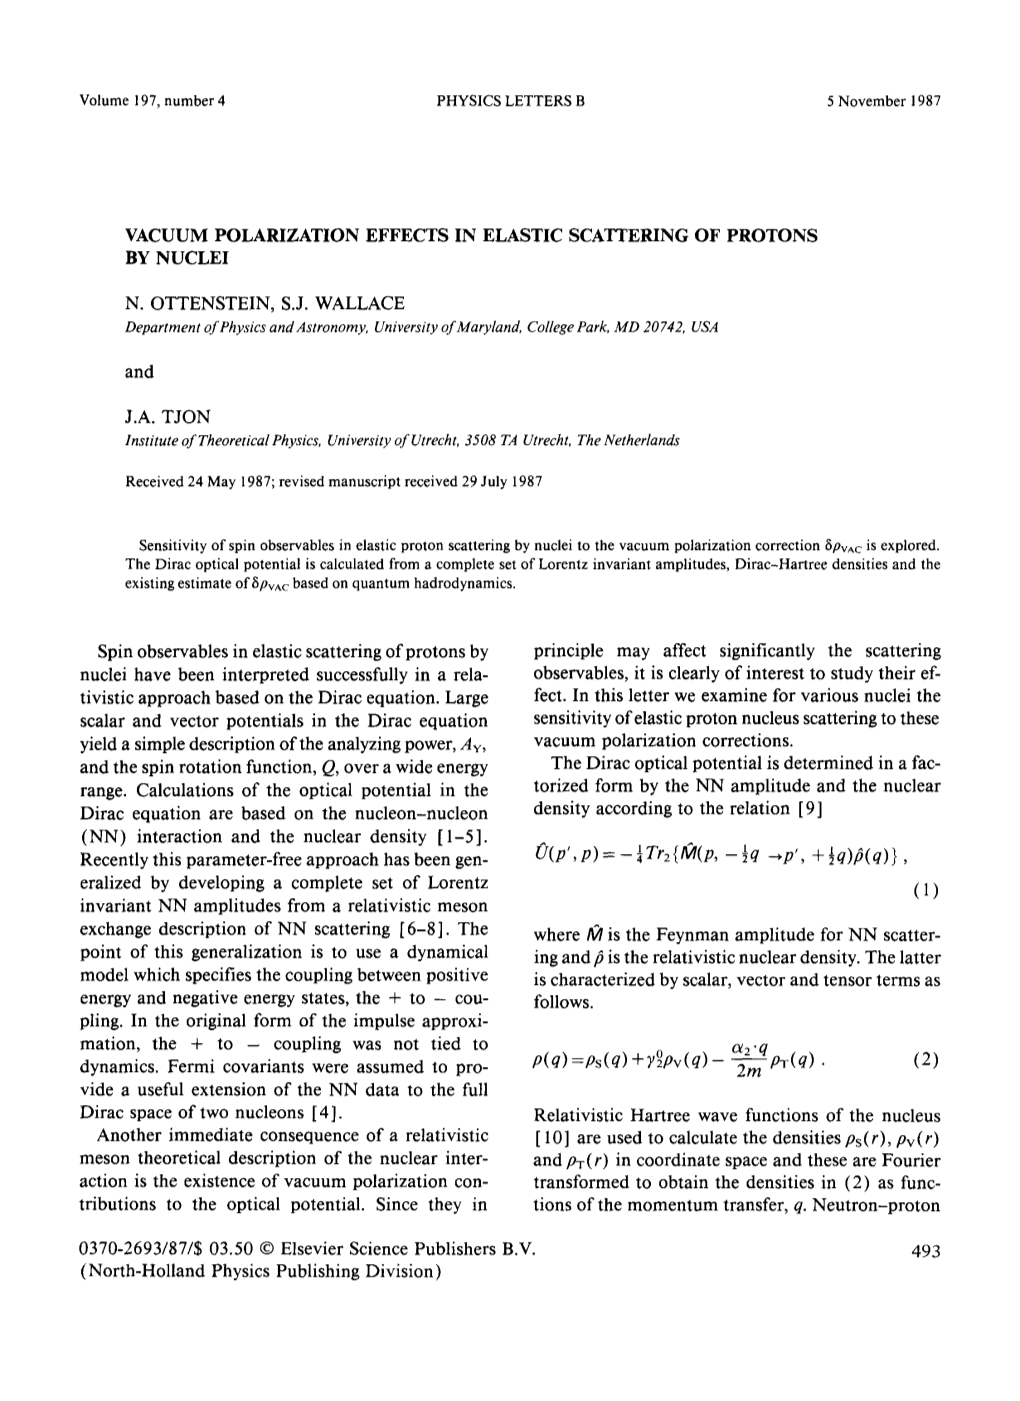 Volume 197, Number 4 PHYSICS LETTERS B 5 November 1987 VACUUM POLARIZATION EFFECTS in ELASTIC SCATTERING of PROTONS by NUCLEI N